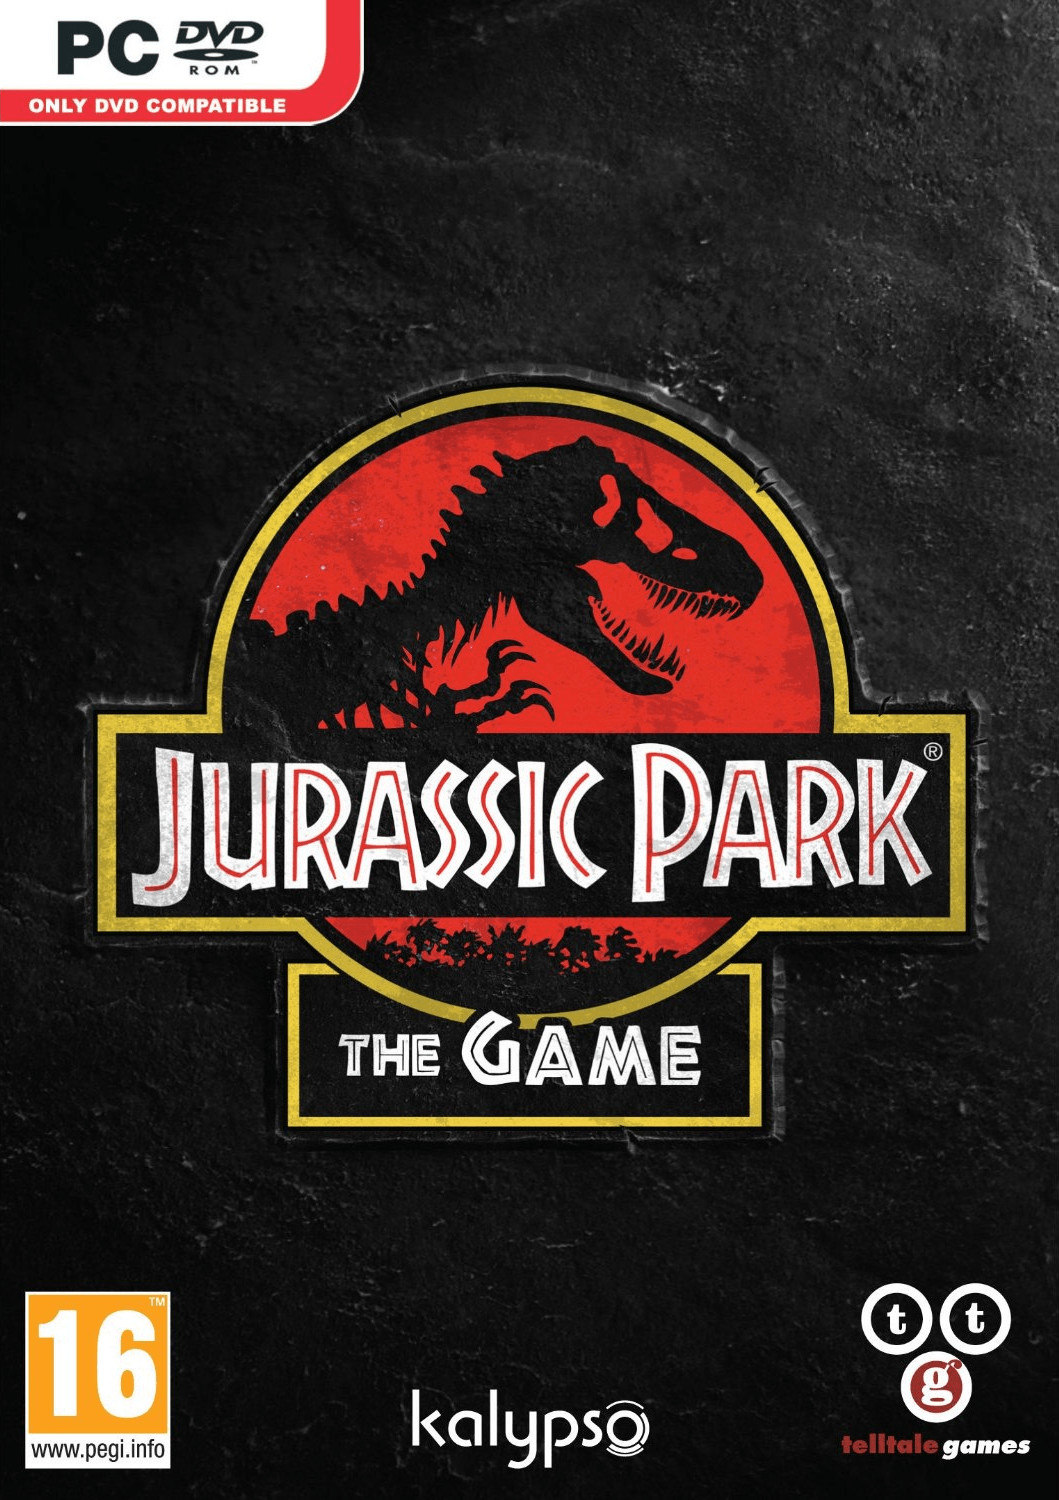 buy-jurassic-park-the-game-pc-from-45-50-today-best-deals-on